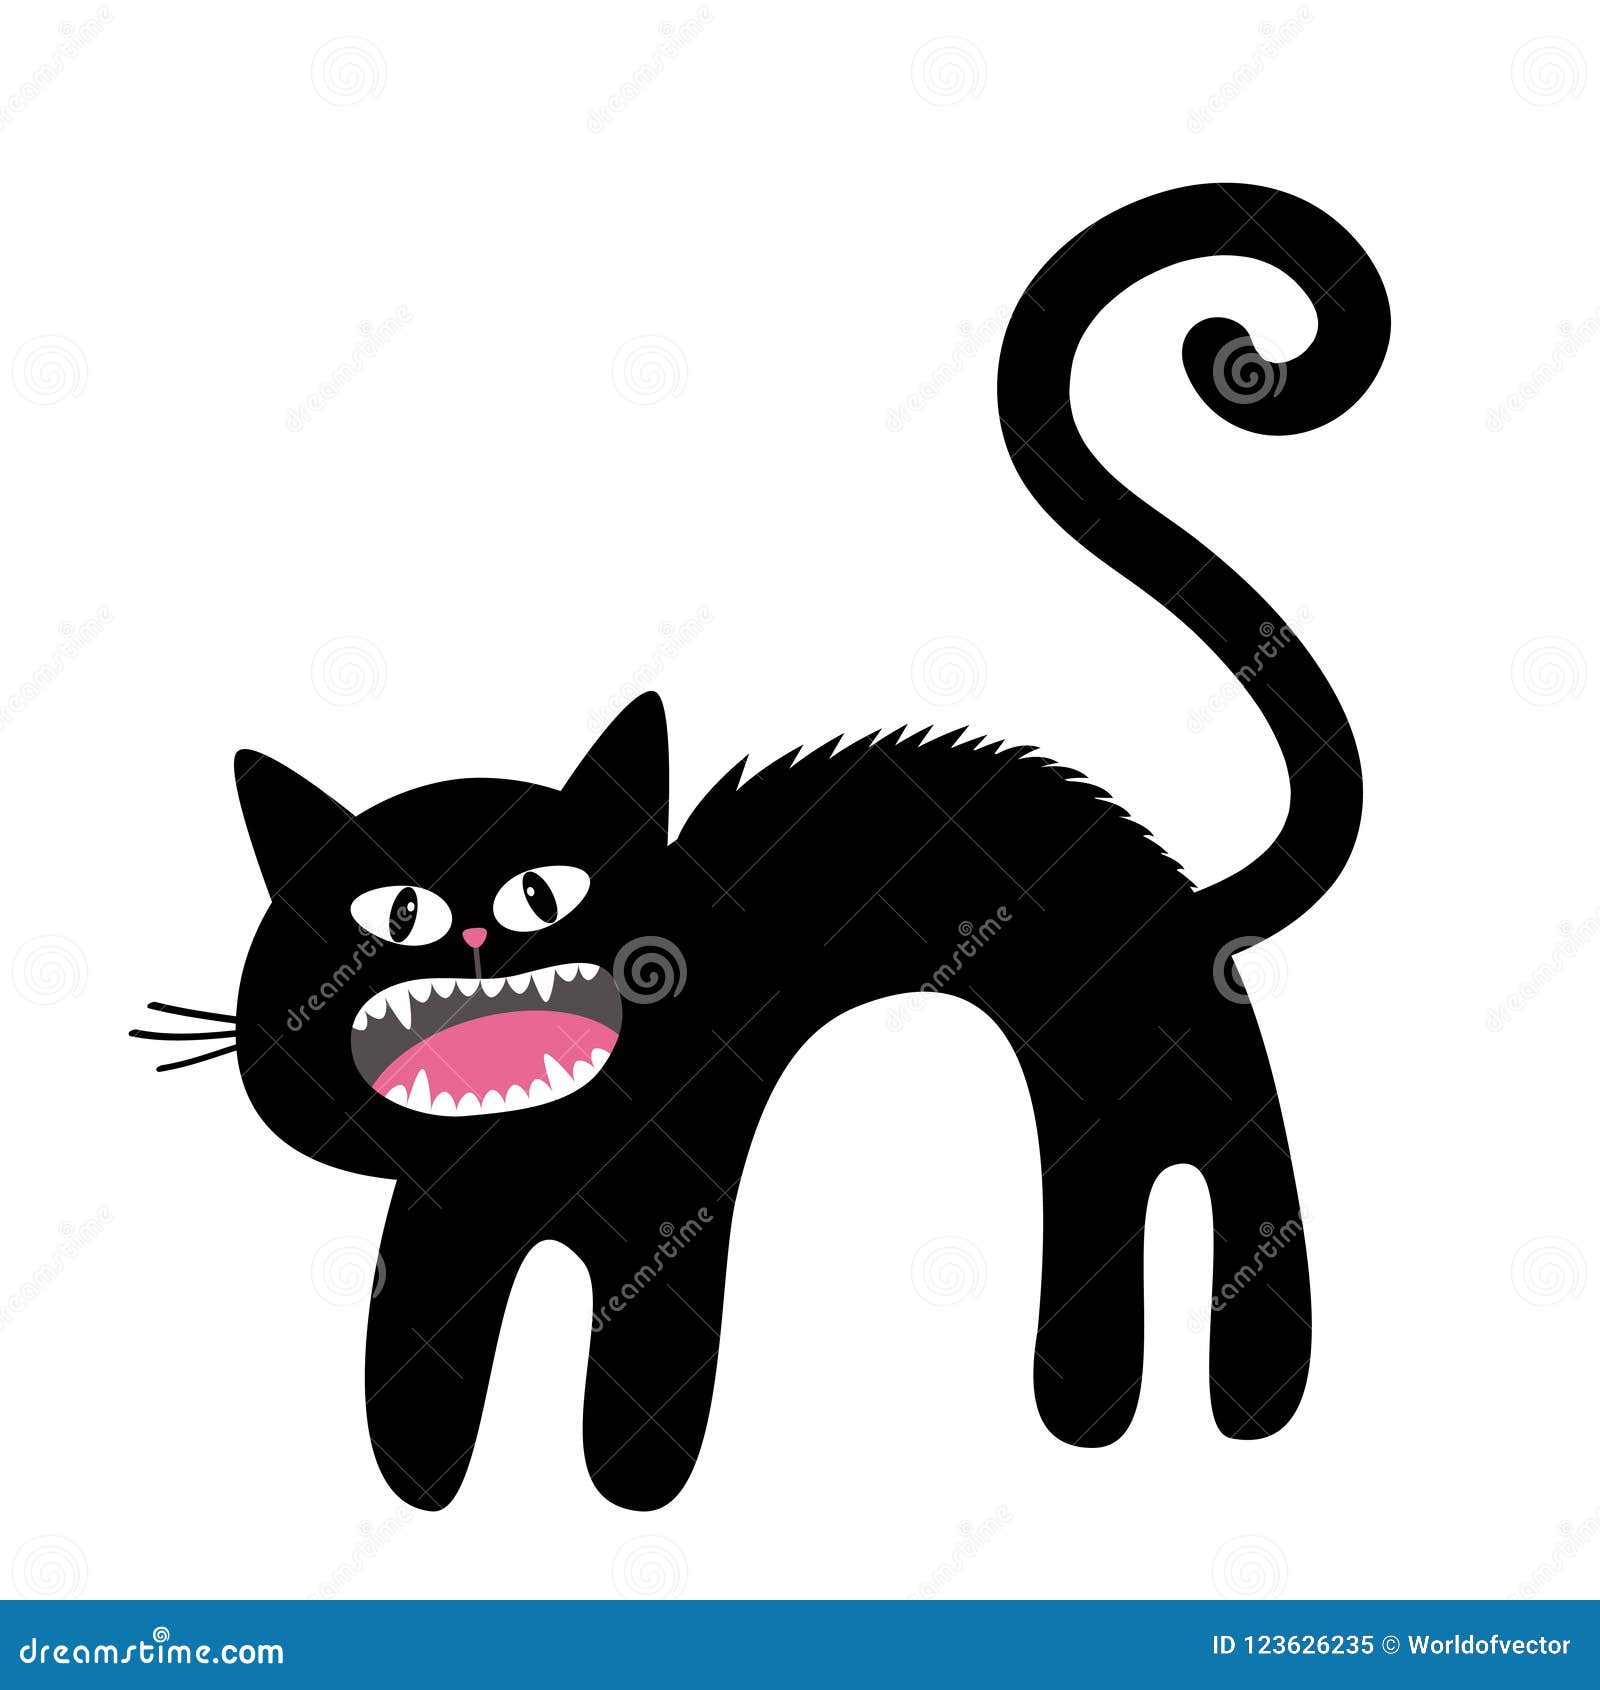 frightened cat arch back. screaming kitten. hair fur stands on end. eyes, fangs, moustaches whisker. cute funny cartoon character.